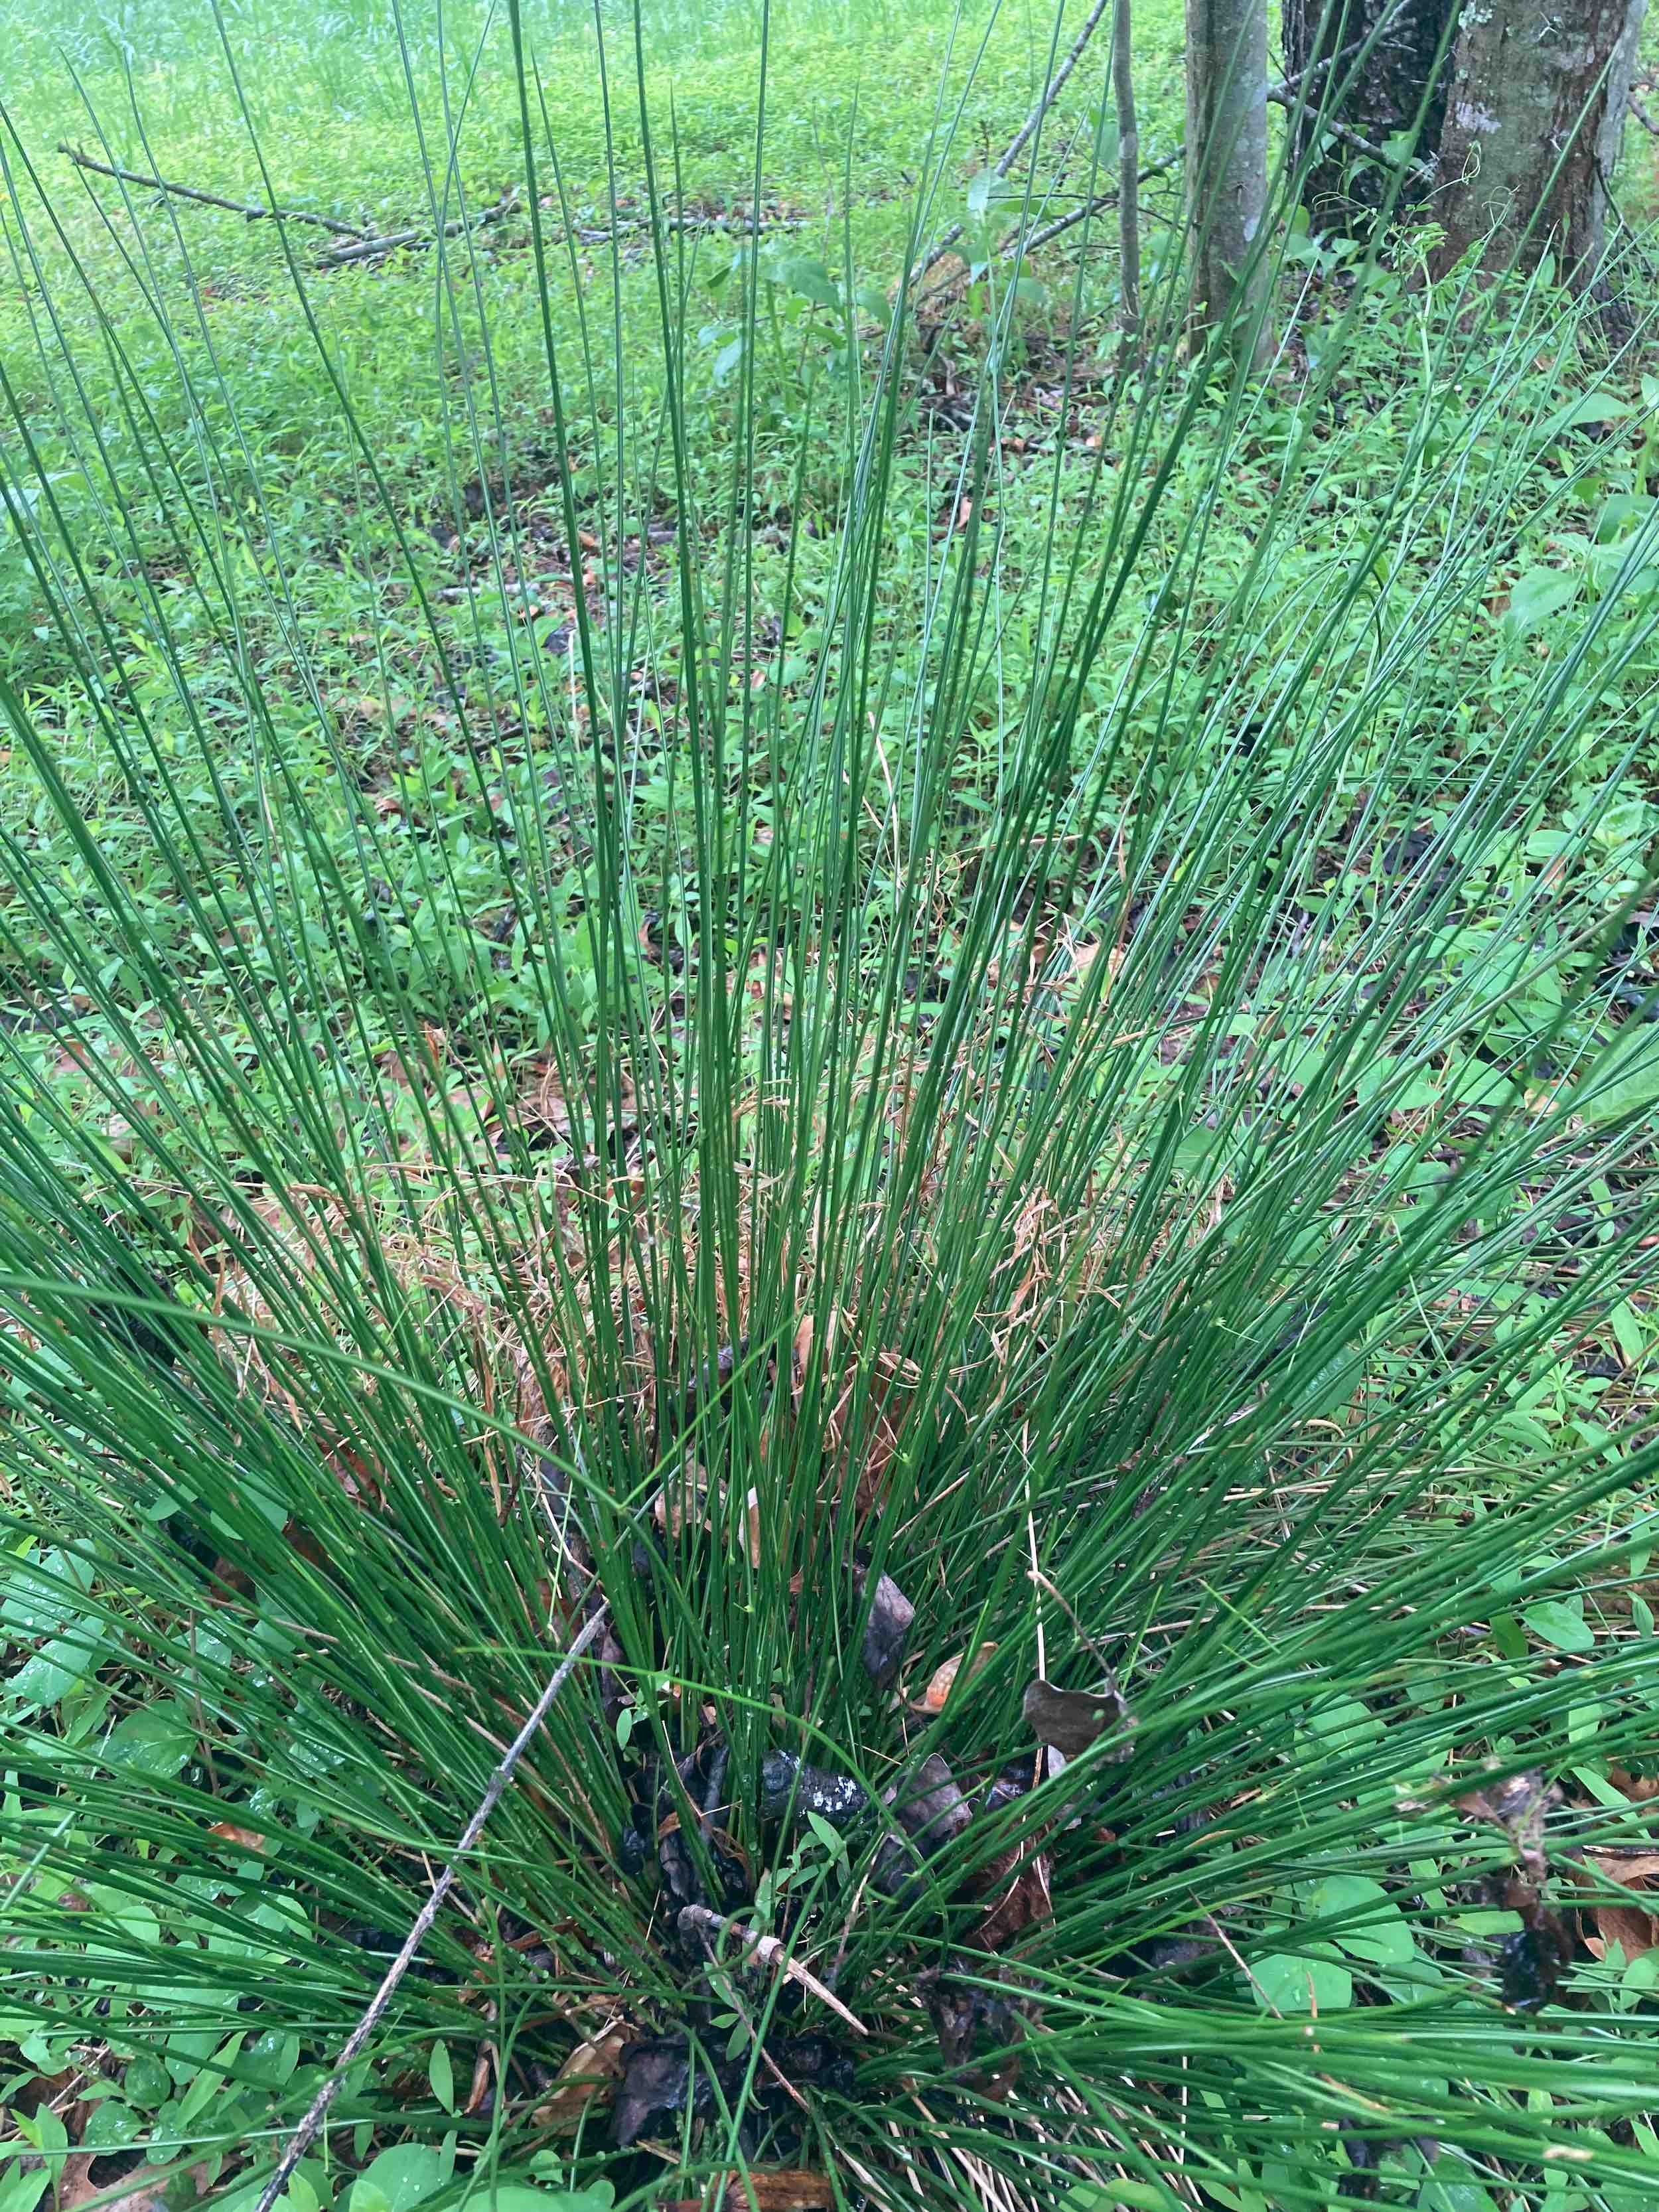 The Scientific Name is Juncus effusus var. solutus. You will likely hear them called Common Rush, Soft Rush. This picture shows the Clumps can get quite large. of Juncus effusus var. solutus